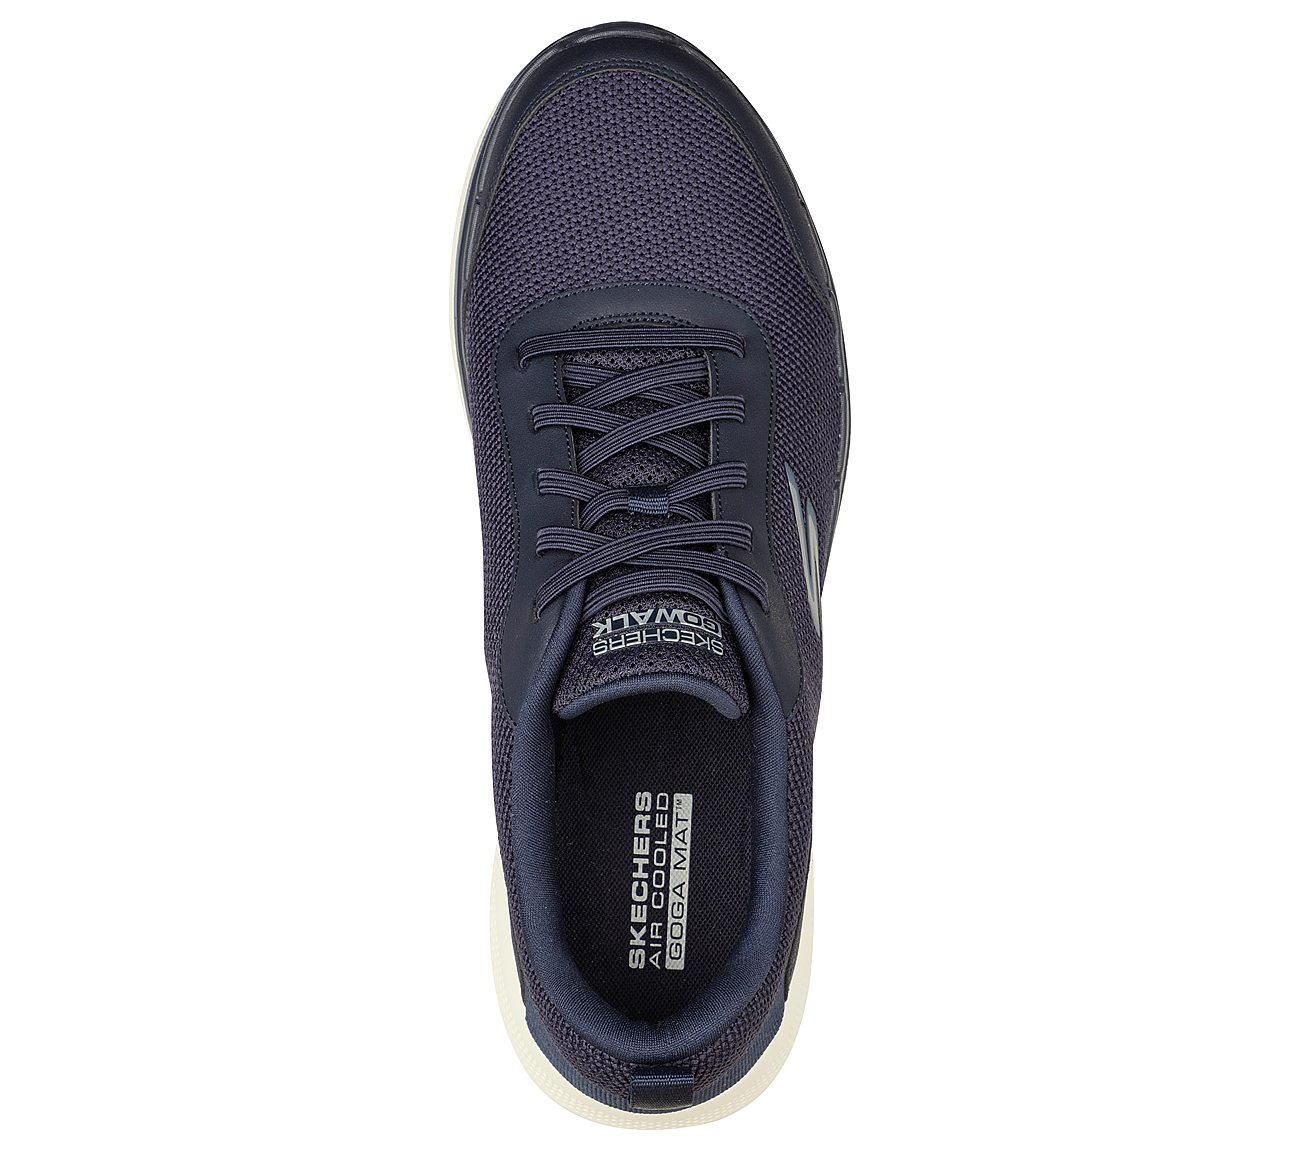 Skechers Navy Blue Go Walk 6 Bold-Knight Mens Lace Up Shoes - Style ID ...